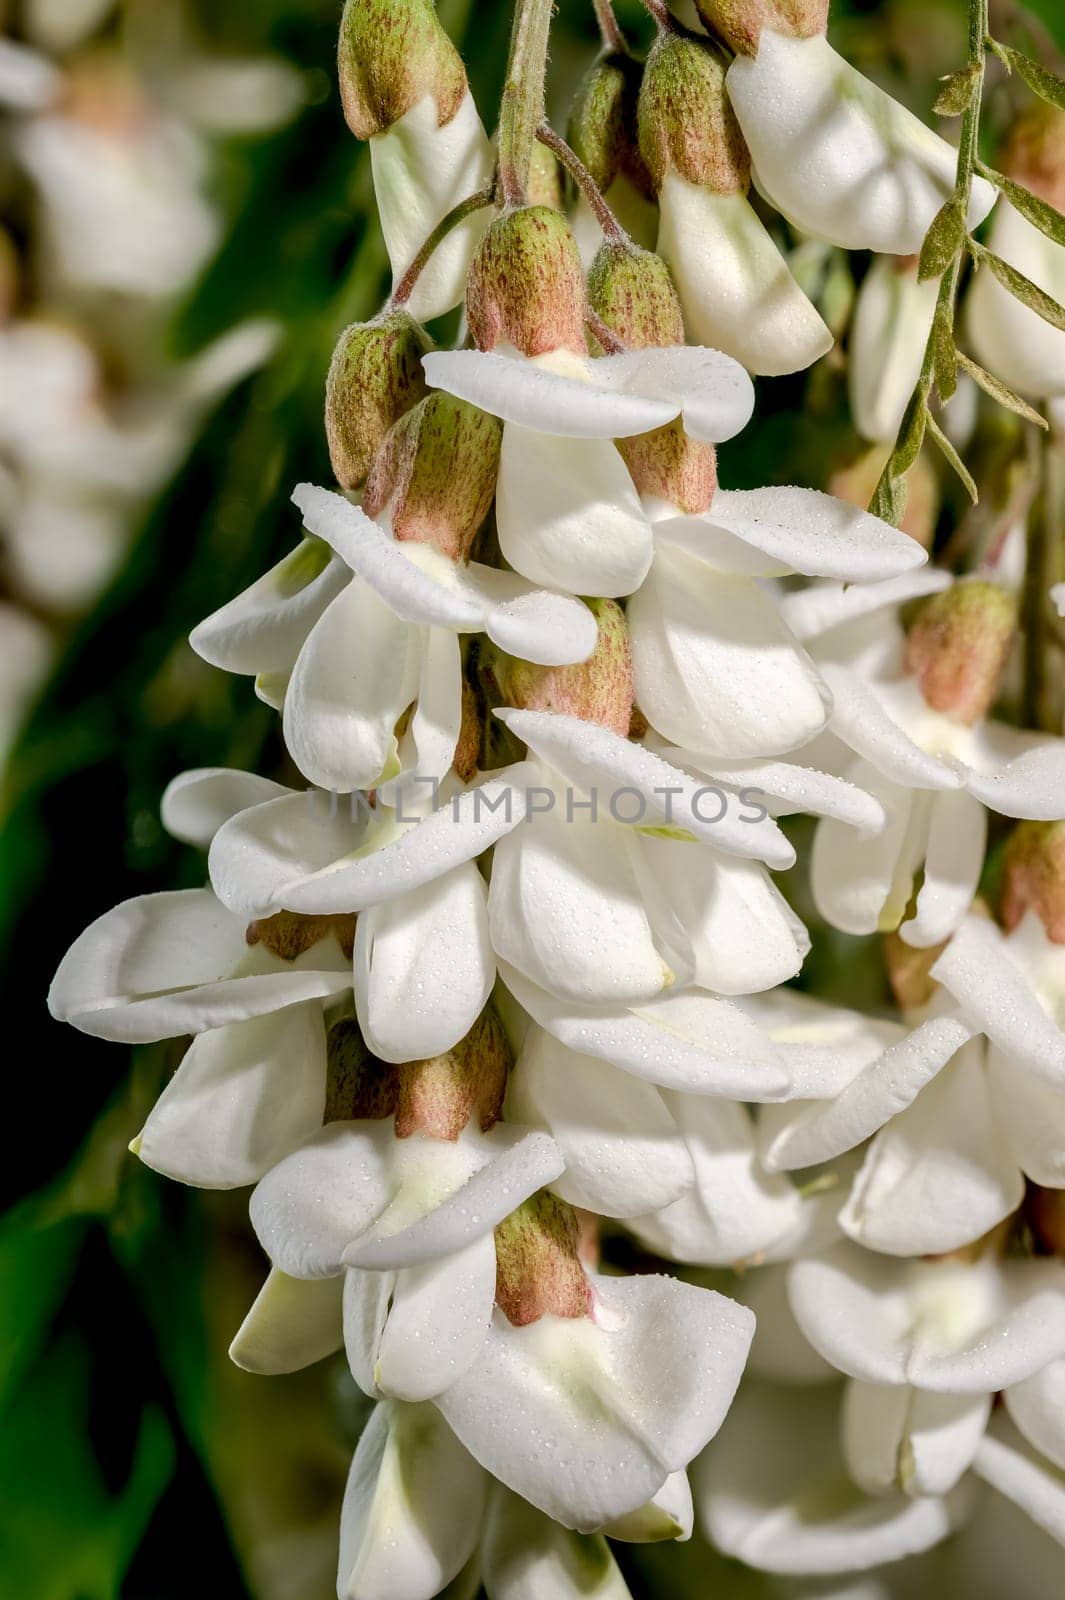 Beautiful Blooming flowers of white acacia tree on a black background. Flower head close-up.